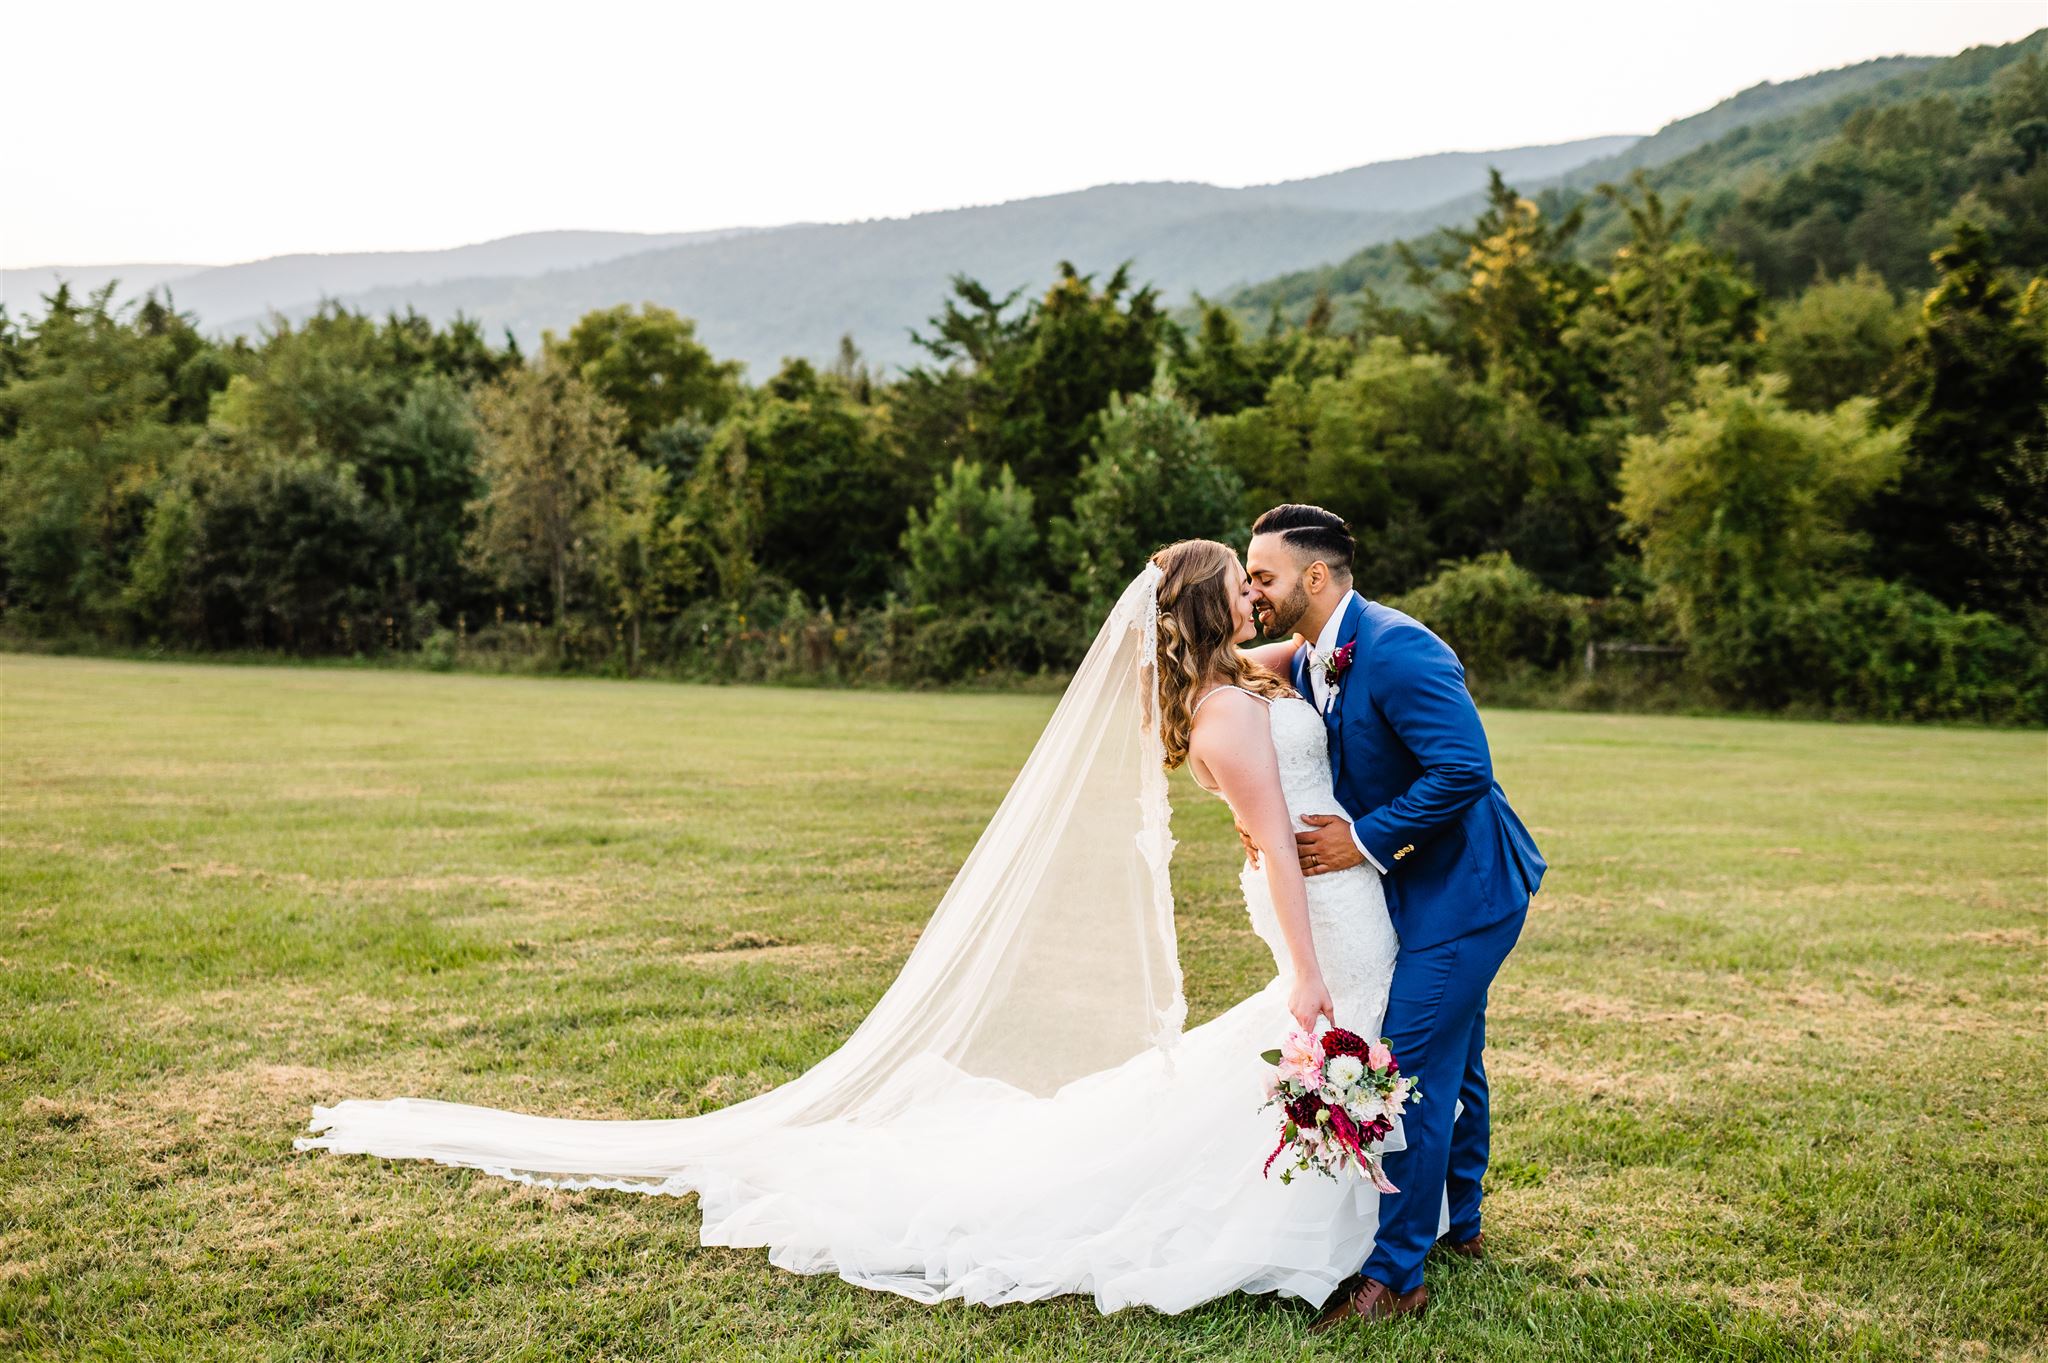 Charlottesville weddin gphotographer captures groom dipping his bride backwards and kissing her passionately for their Shenandoah National Park wedding